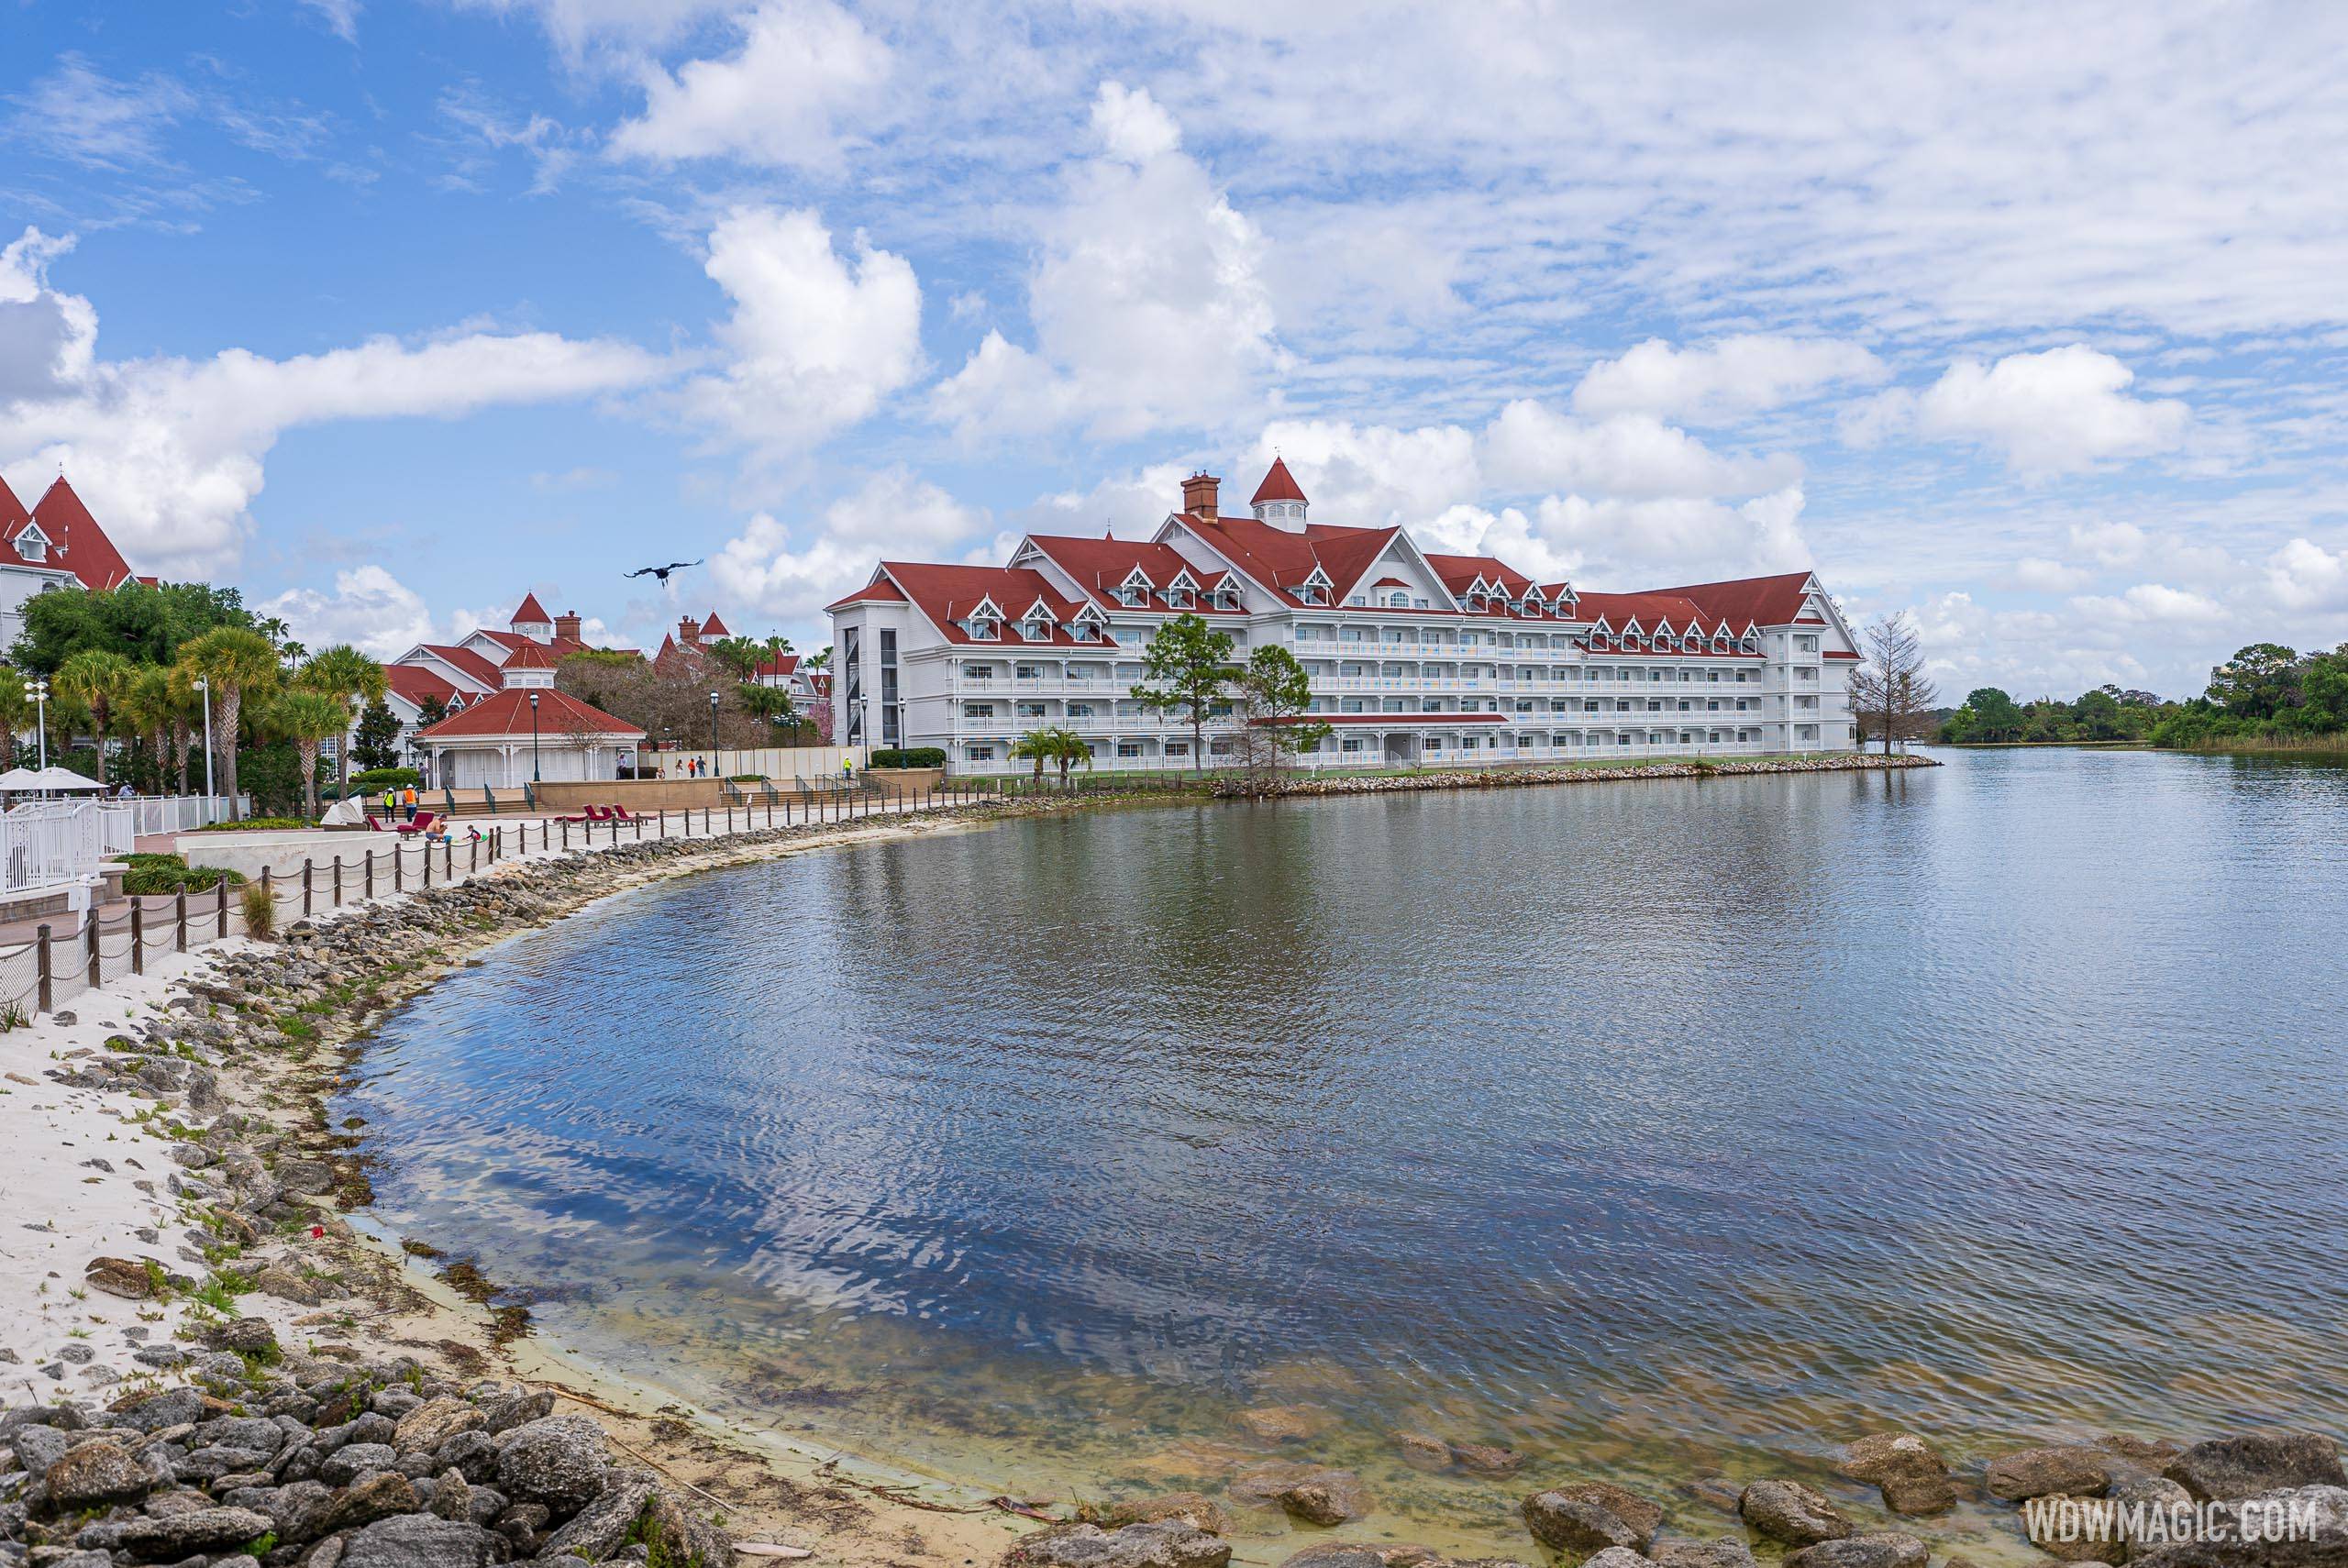 Construction walls go up as rooms are emptied at Big Pine Key in Disney's Grand Floridian Resort for DVC transformation